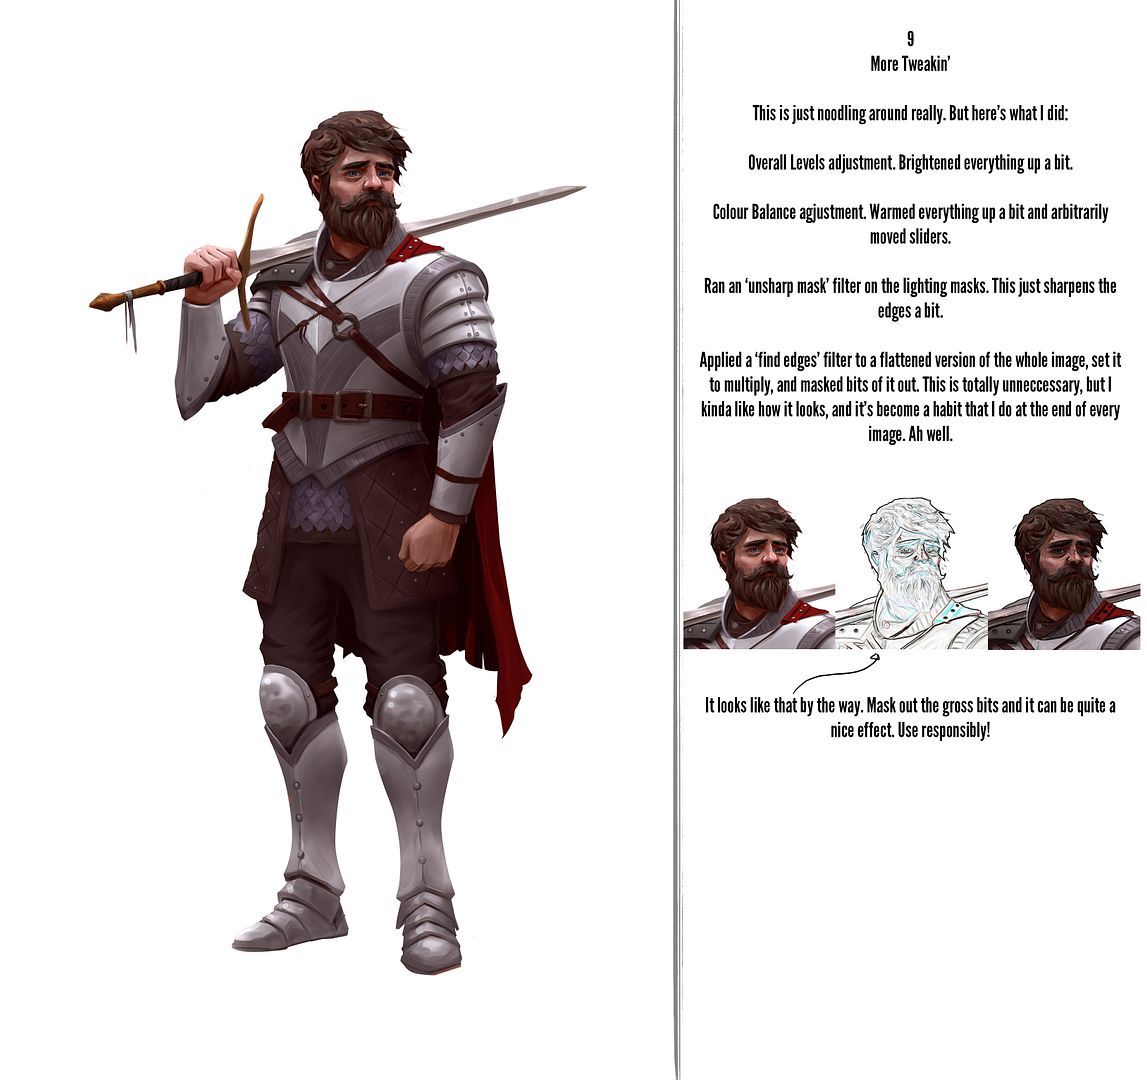 [Image: Knight_StepByStep_With_Notes_9.jpg]